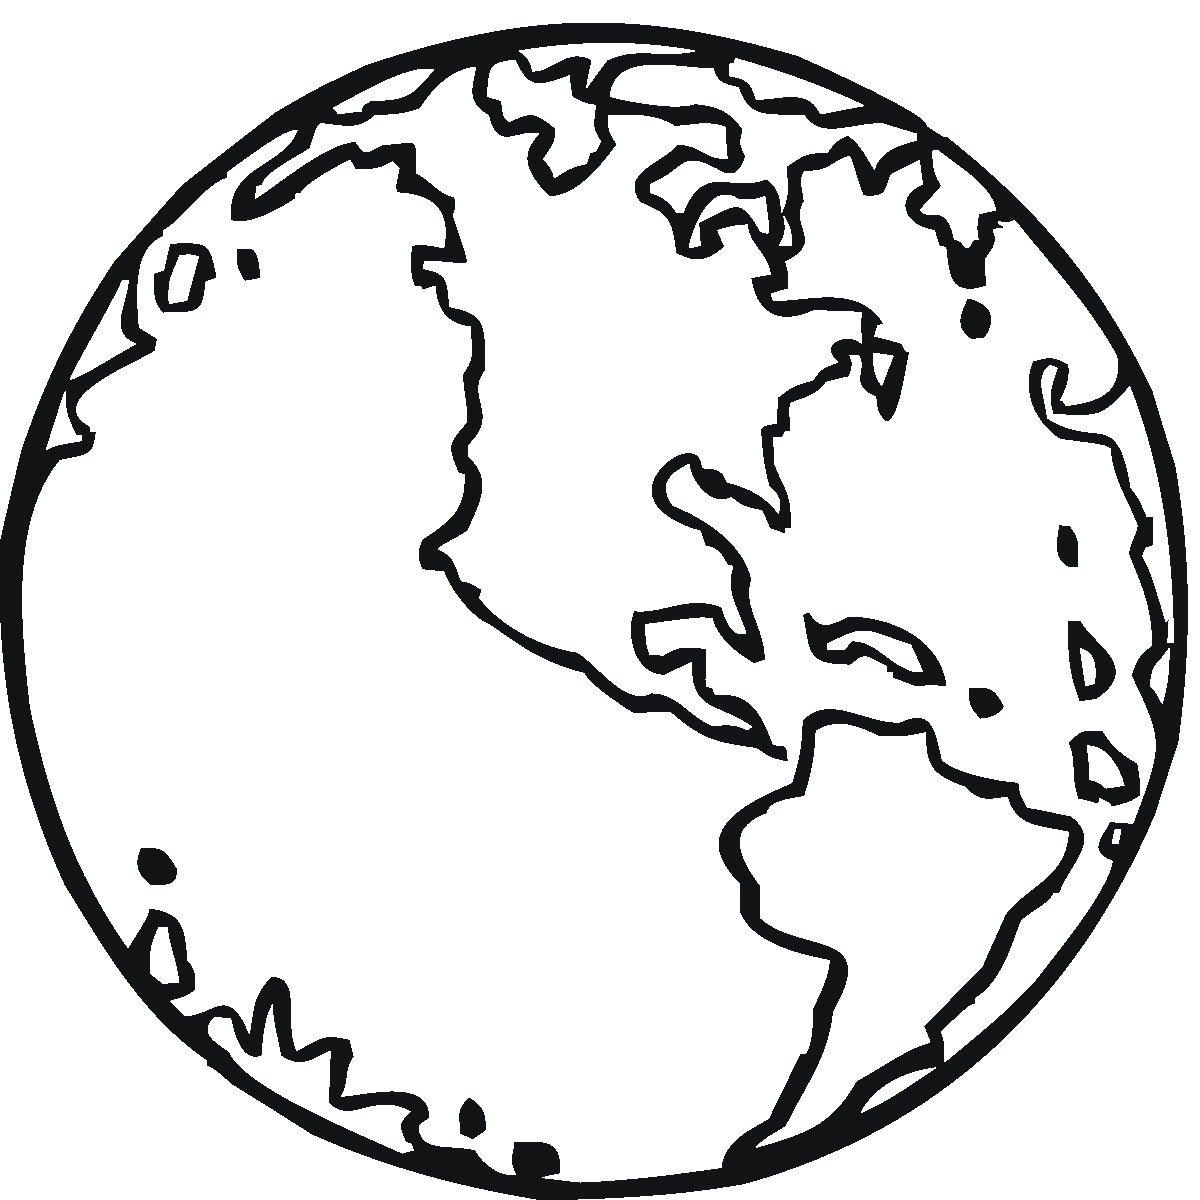 Free Printable Earth Coloring Pages For Kids | Stuff | Earth - Free Printable Earth Pictures